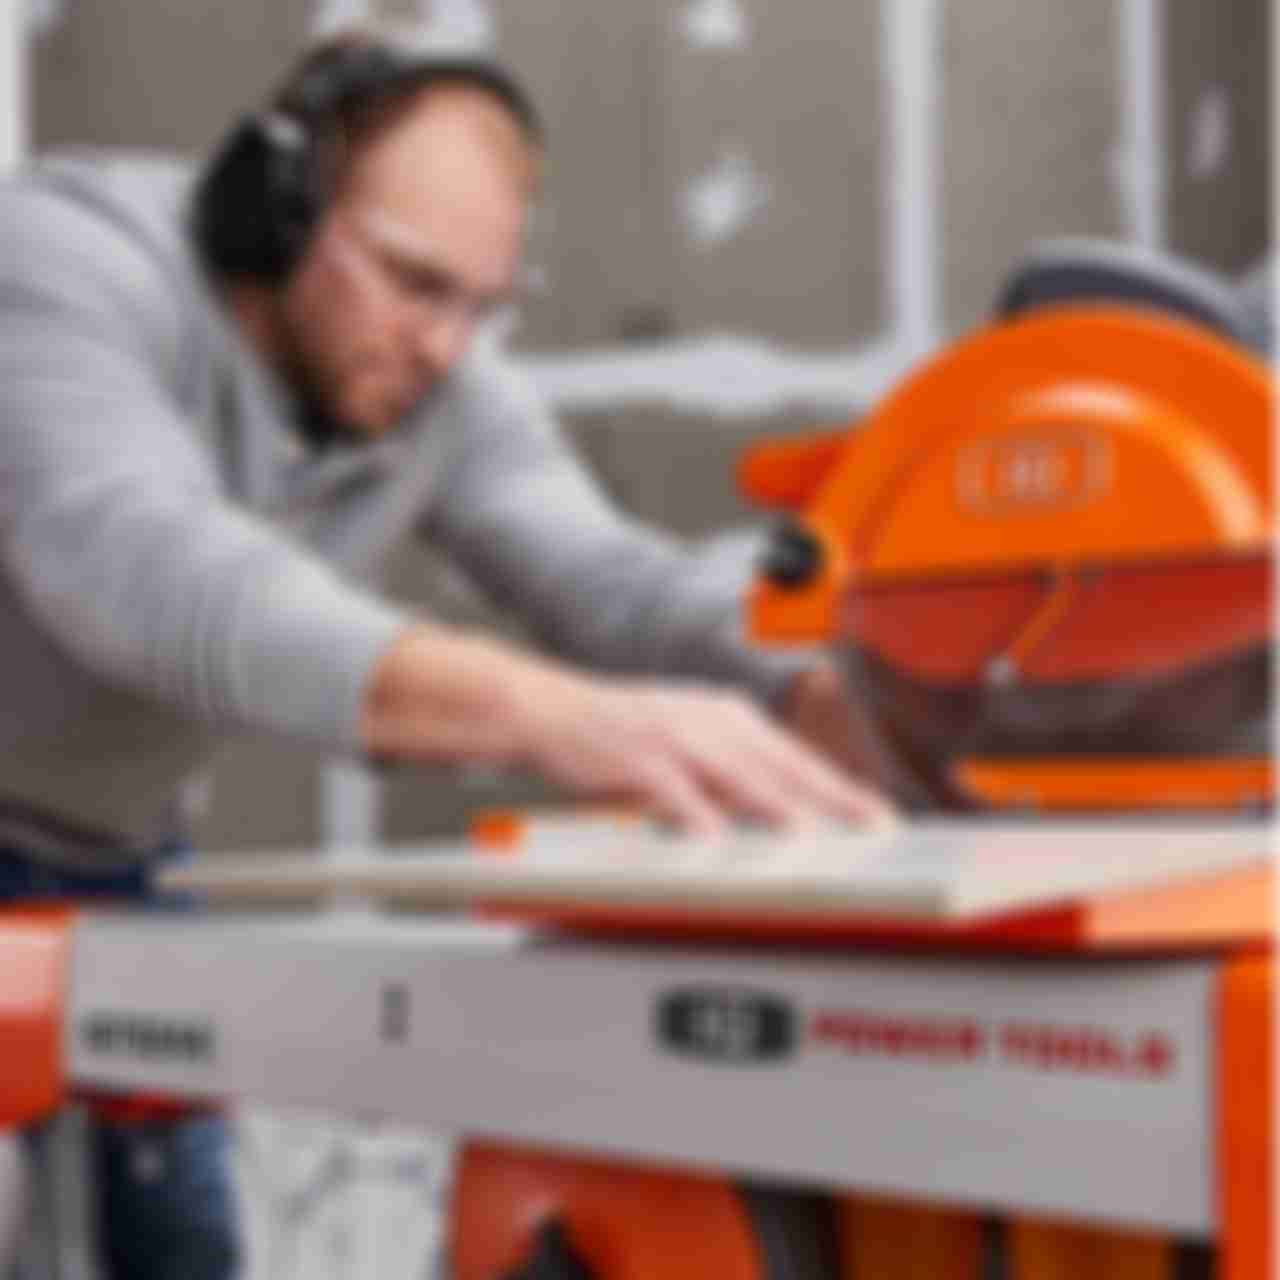 A pro installer cutting tile on an iQ tile saw.